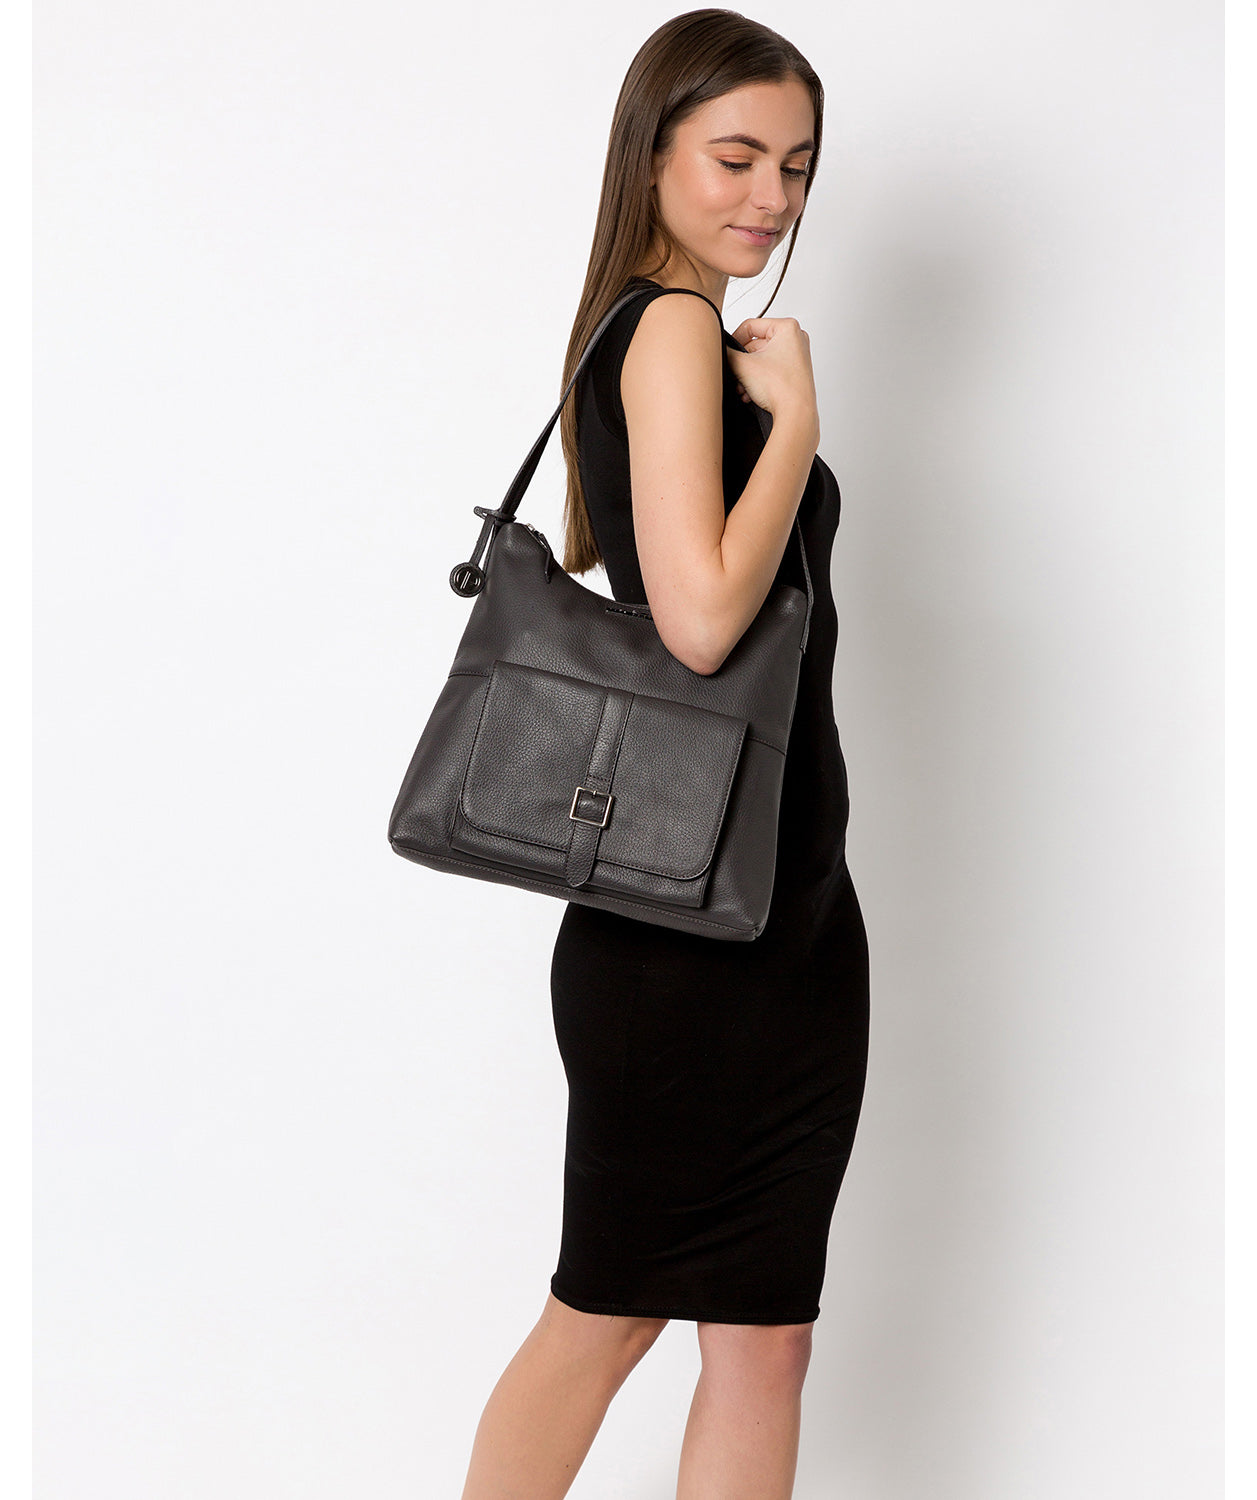 Grey Leather Shoulder Bag 'Irena' by Pure Luxuries – Pure Luxuries London